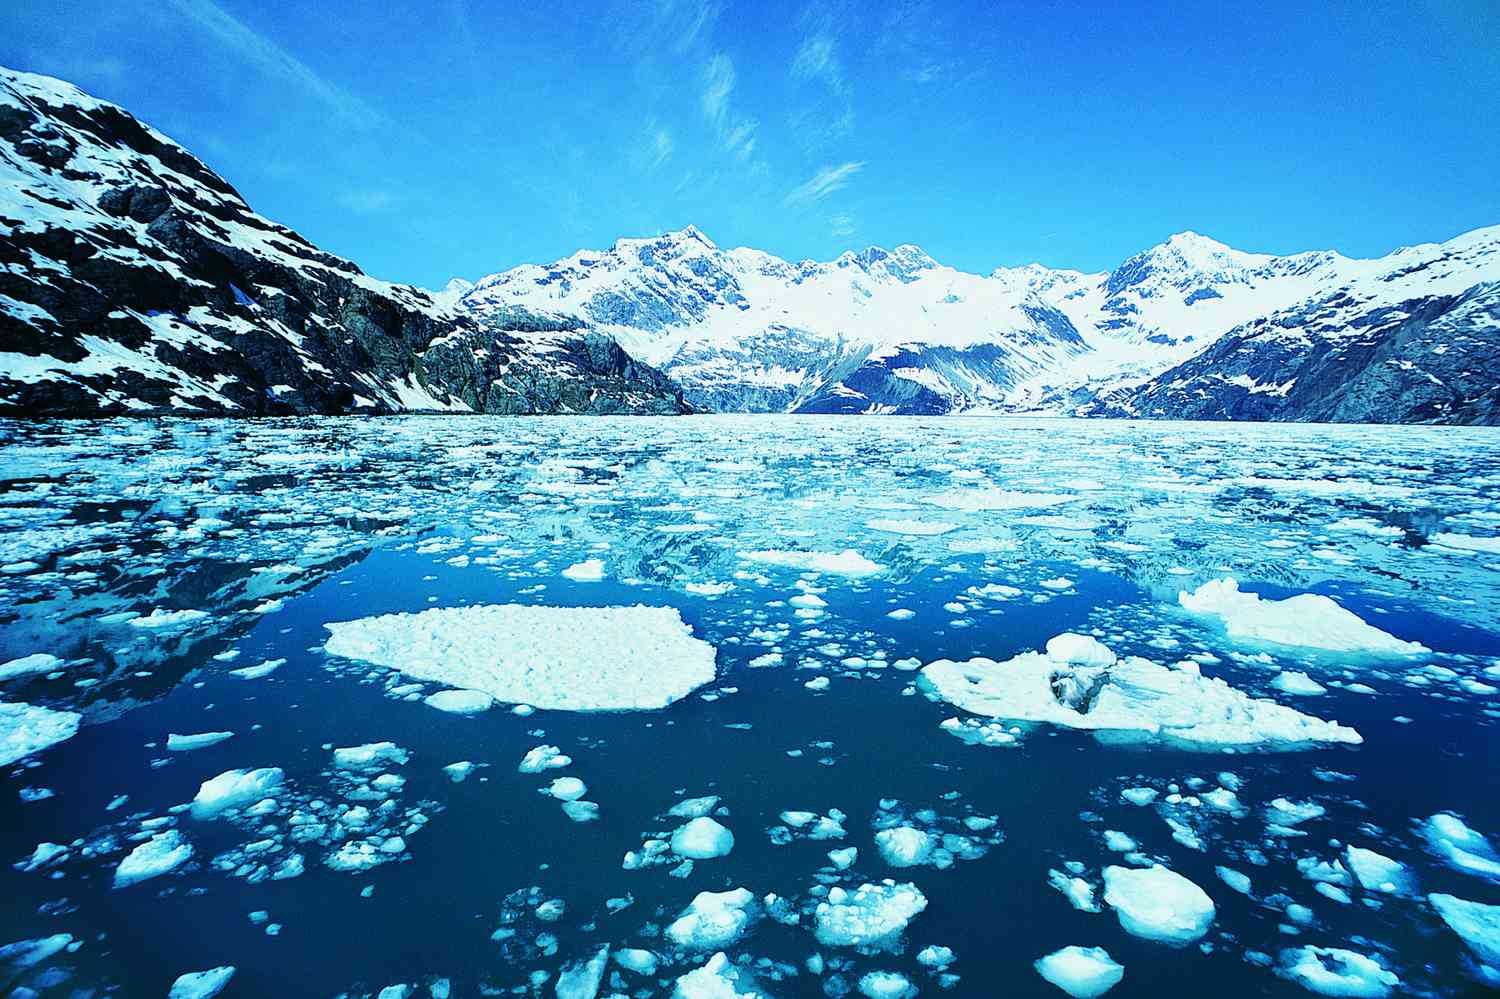 Can You Match These Extraordinary Natural Features to Their Respective Countries? Glacier Bay National Park, Alaska